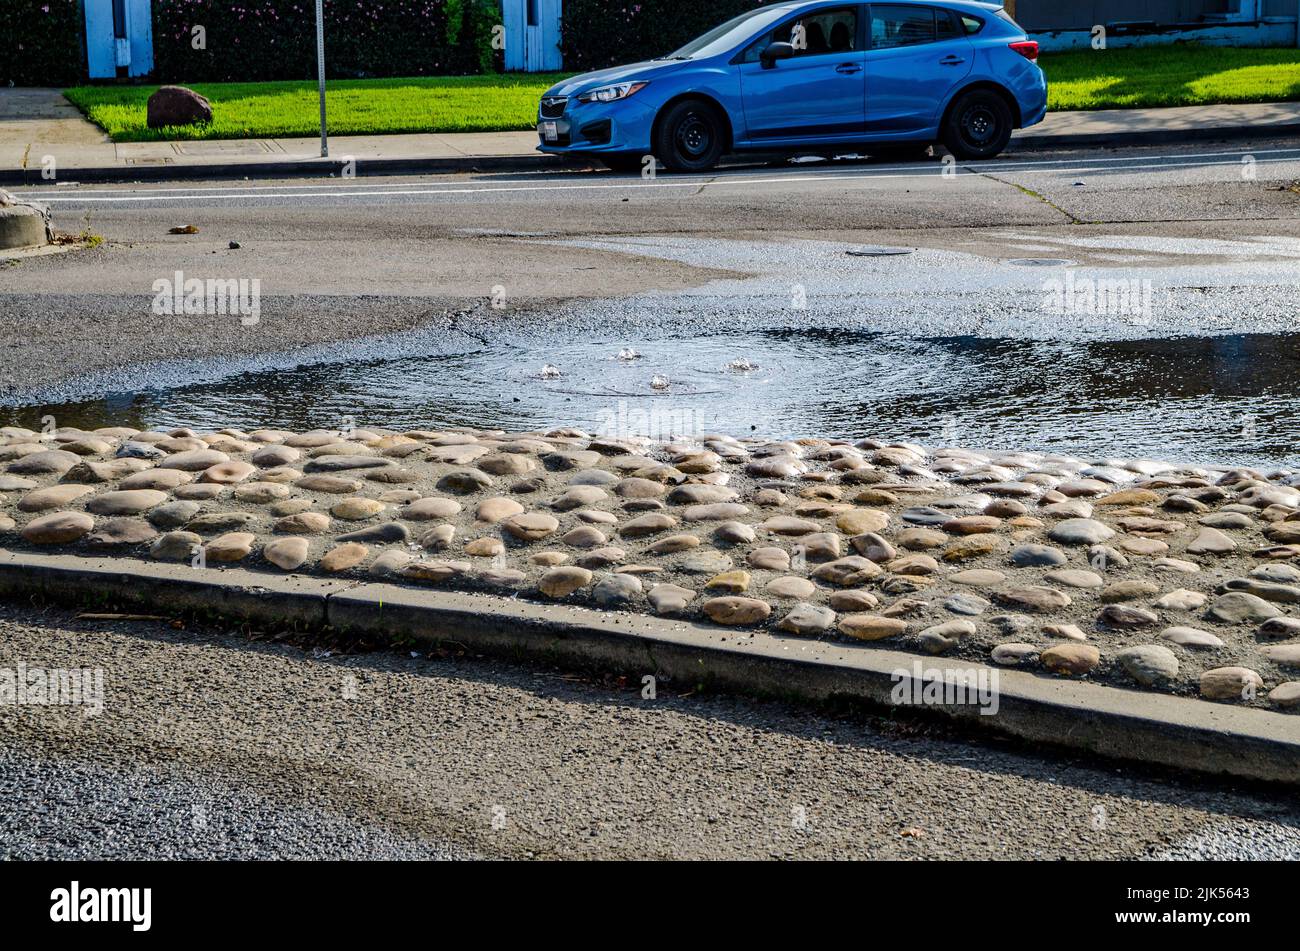 The King tide on December 4 2021 causes minor flooding with bay water backing up through the storm drain system in San Leandro California USA Stock Photo